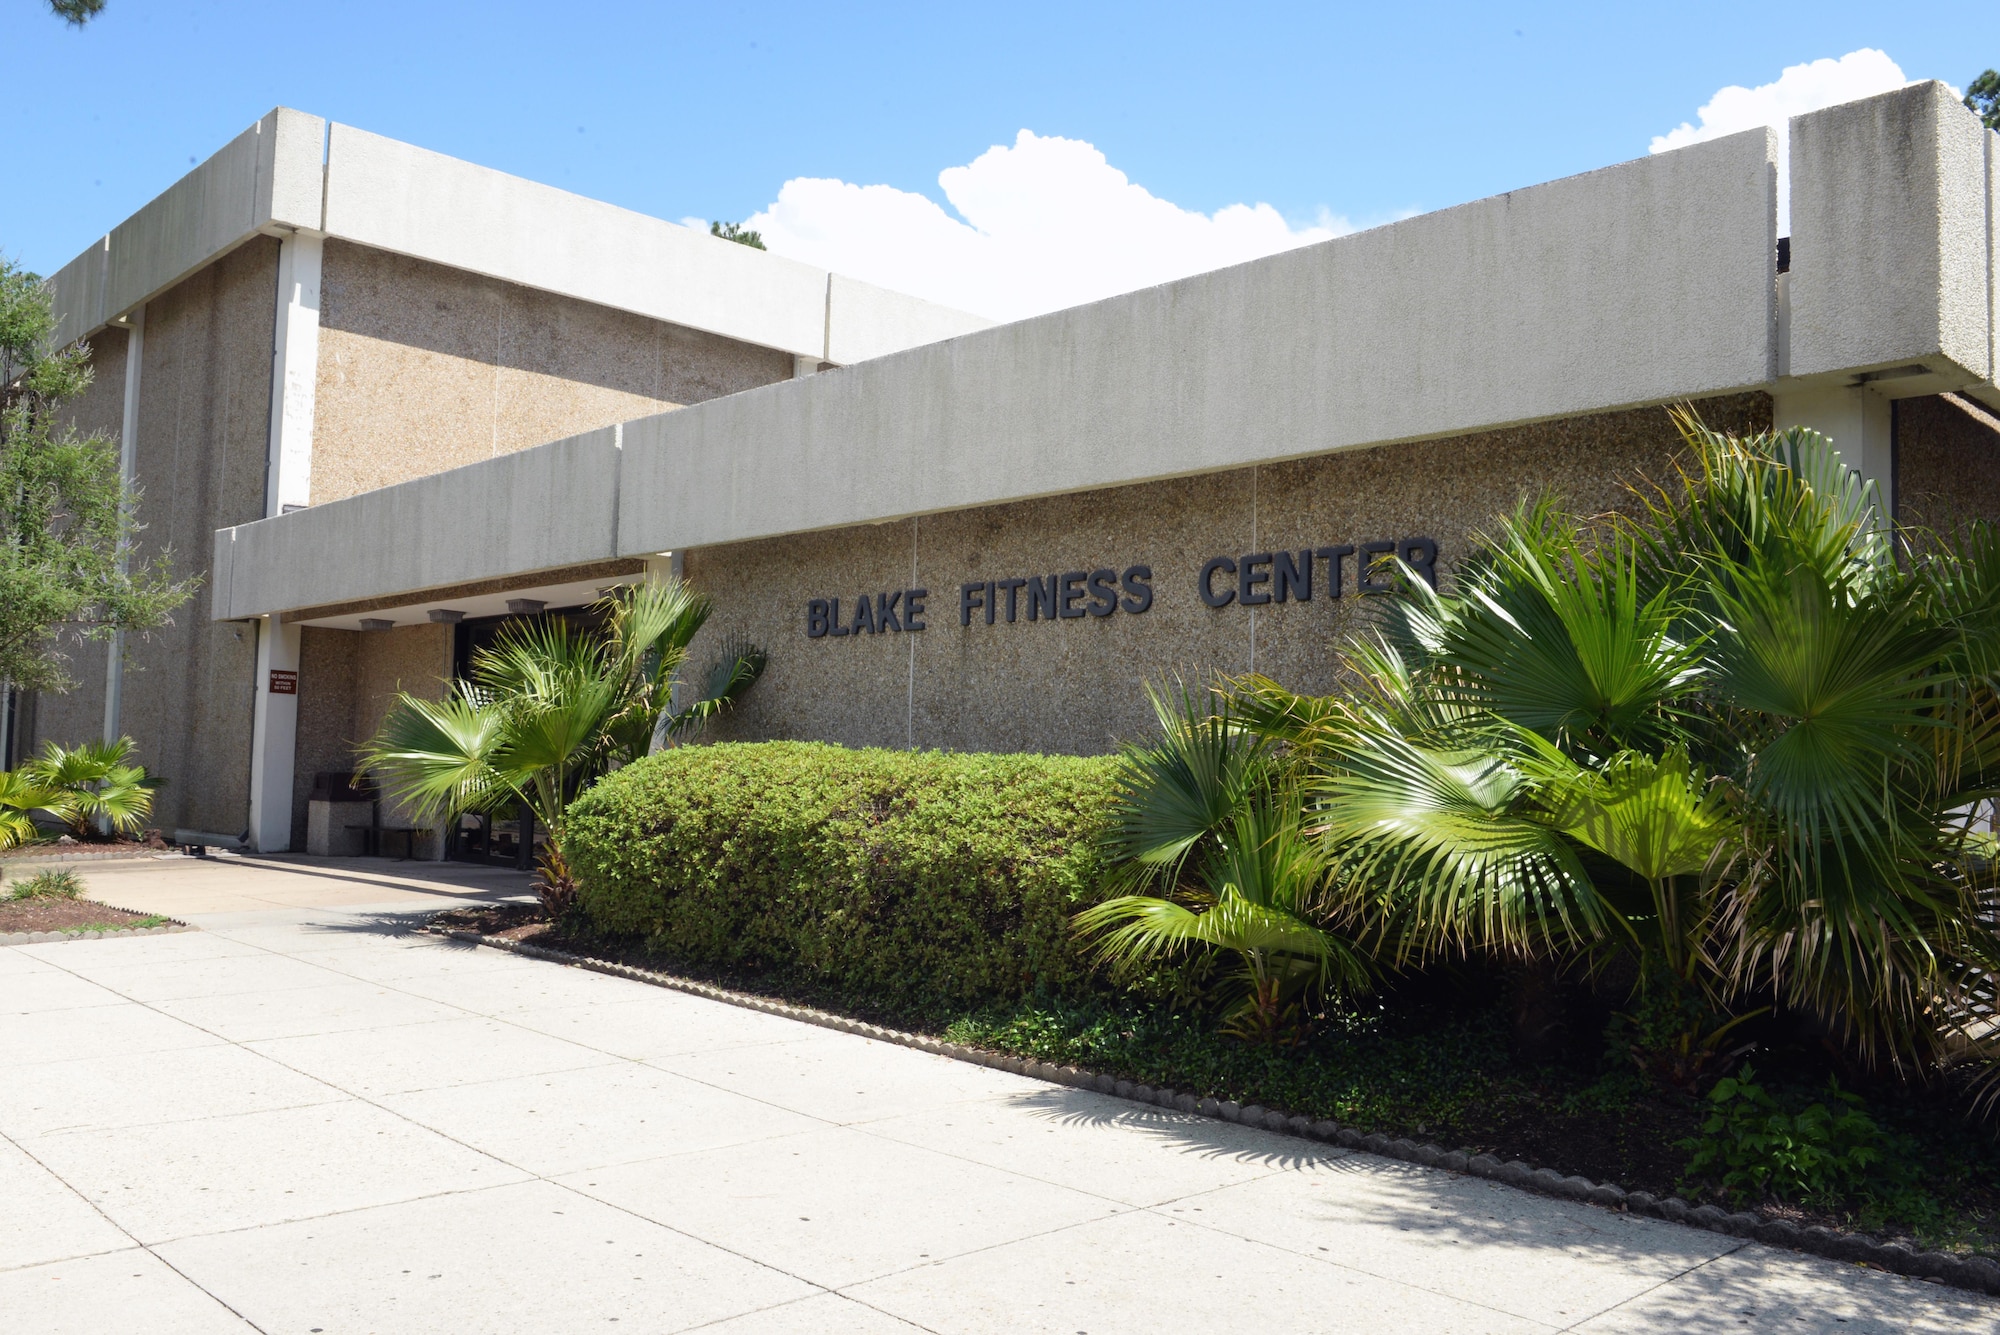 Blake Fitness Center is located in Bldg. 1201 and offers an array of programs to fit your fitness convenience. (U.S. Air Force photo by 2nd Lt. Teddy Barbosa)
